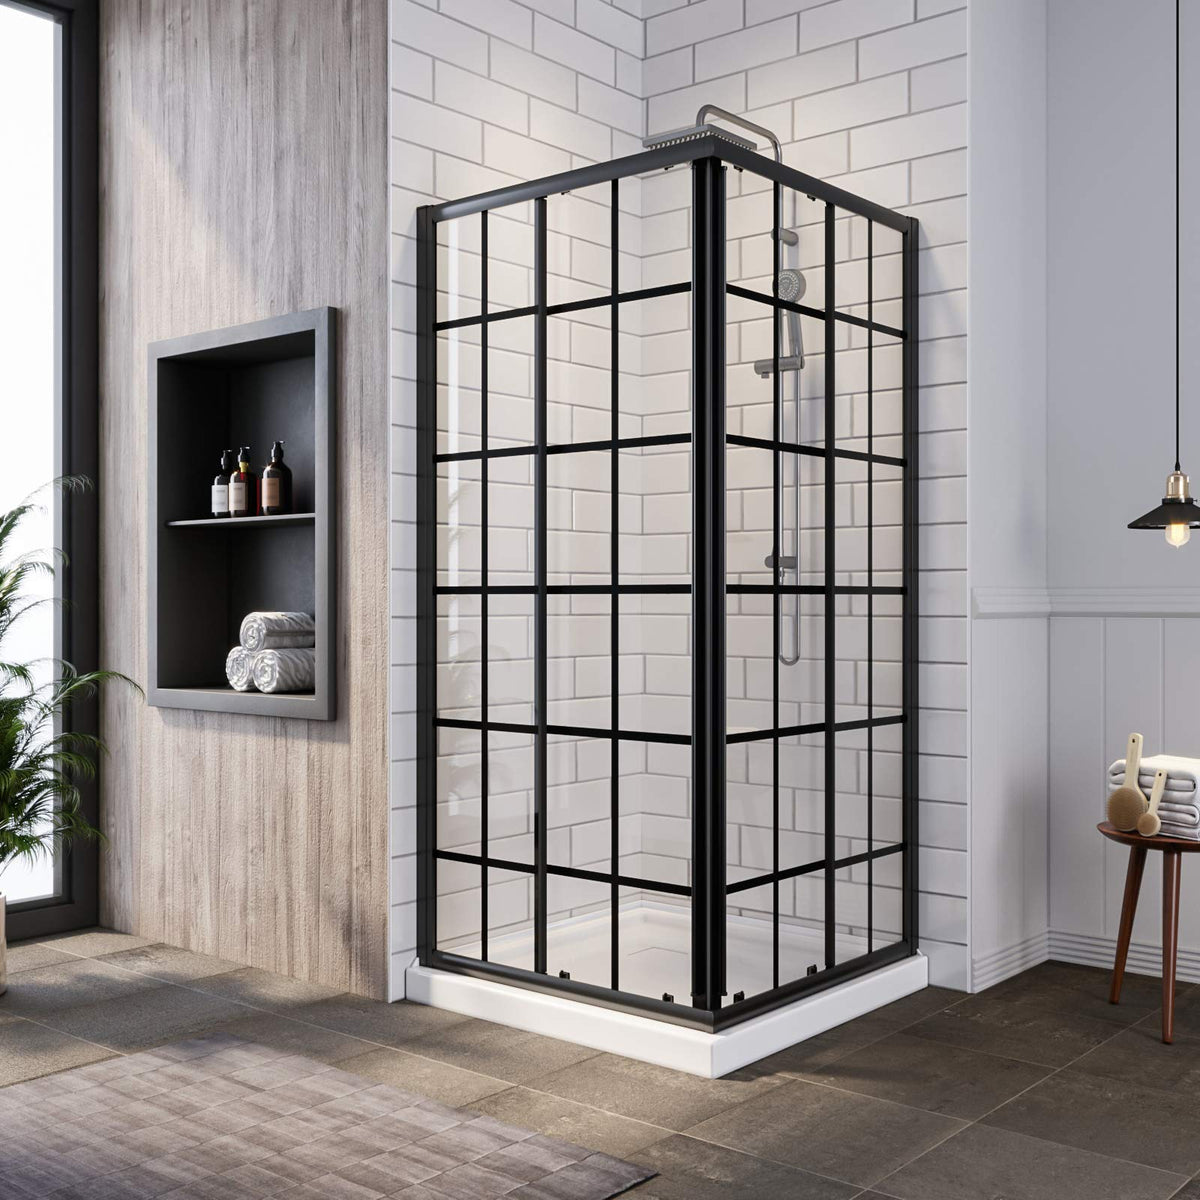 SUNNY SHOWER 34 in. L x 34 in. W x 72 in. H Black Check Corner Entry Enclosure With Sliding Doors